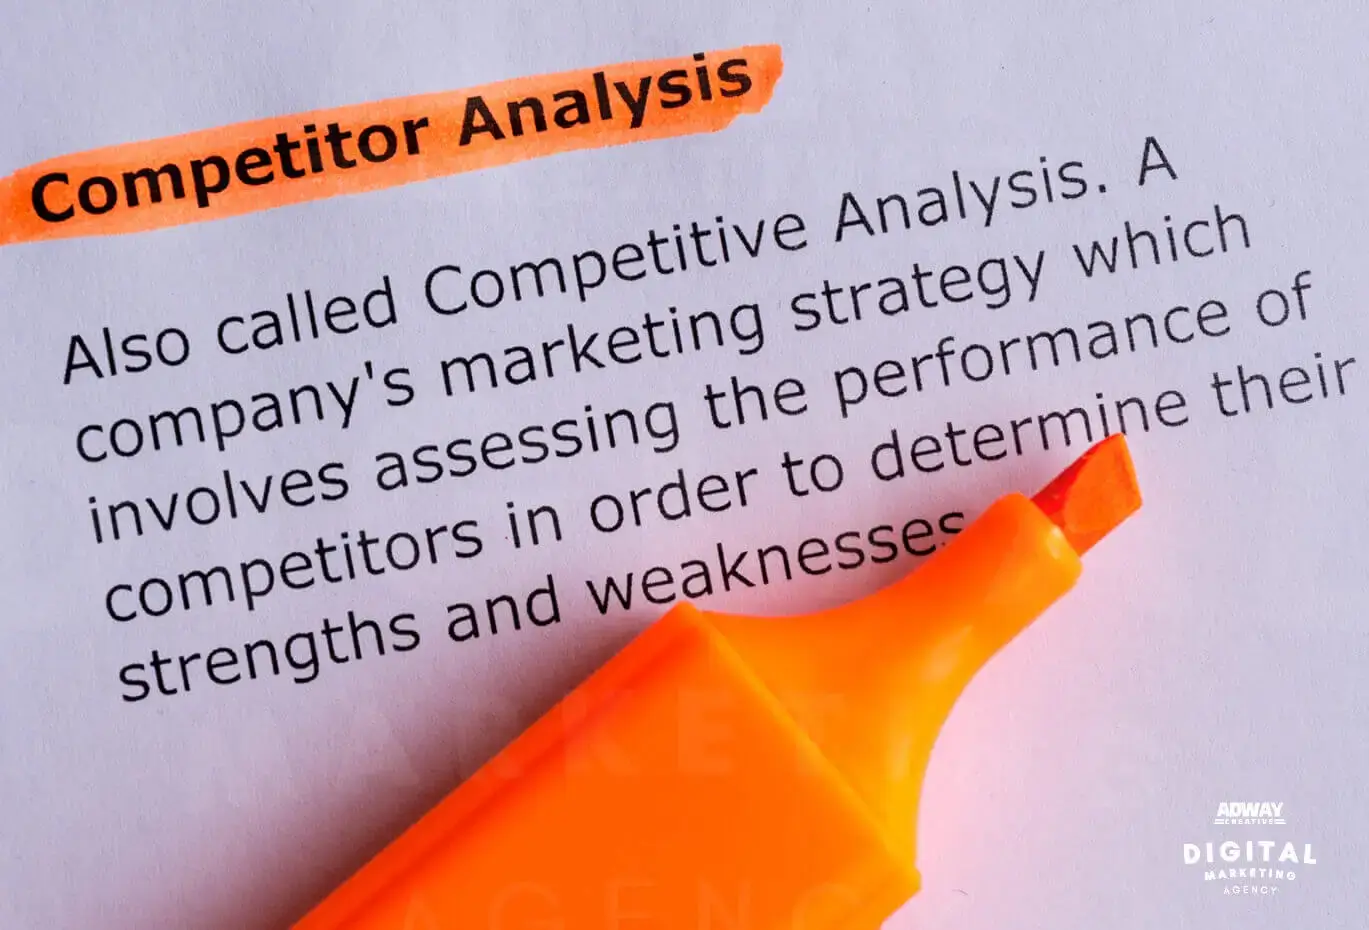 Sentiment Analysis Can Be a Powerful Tool in Competitor Analysis